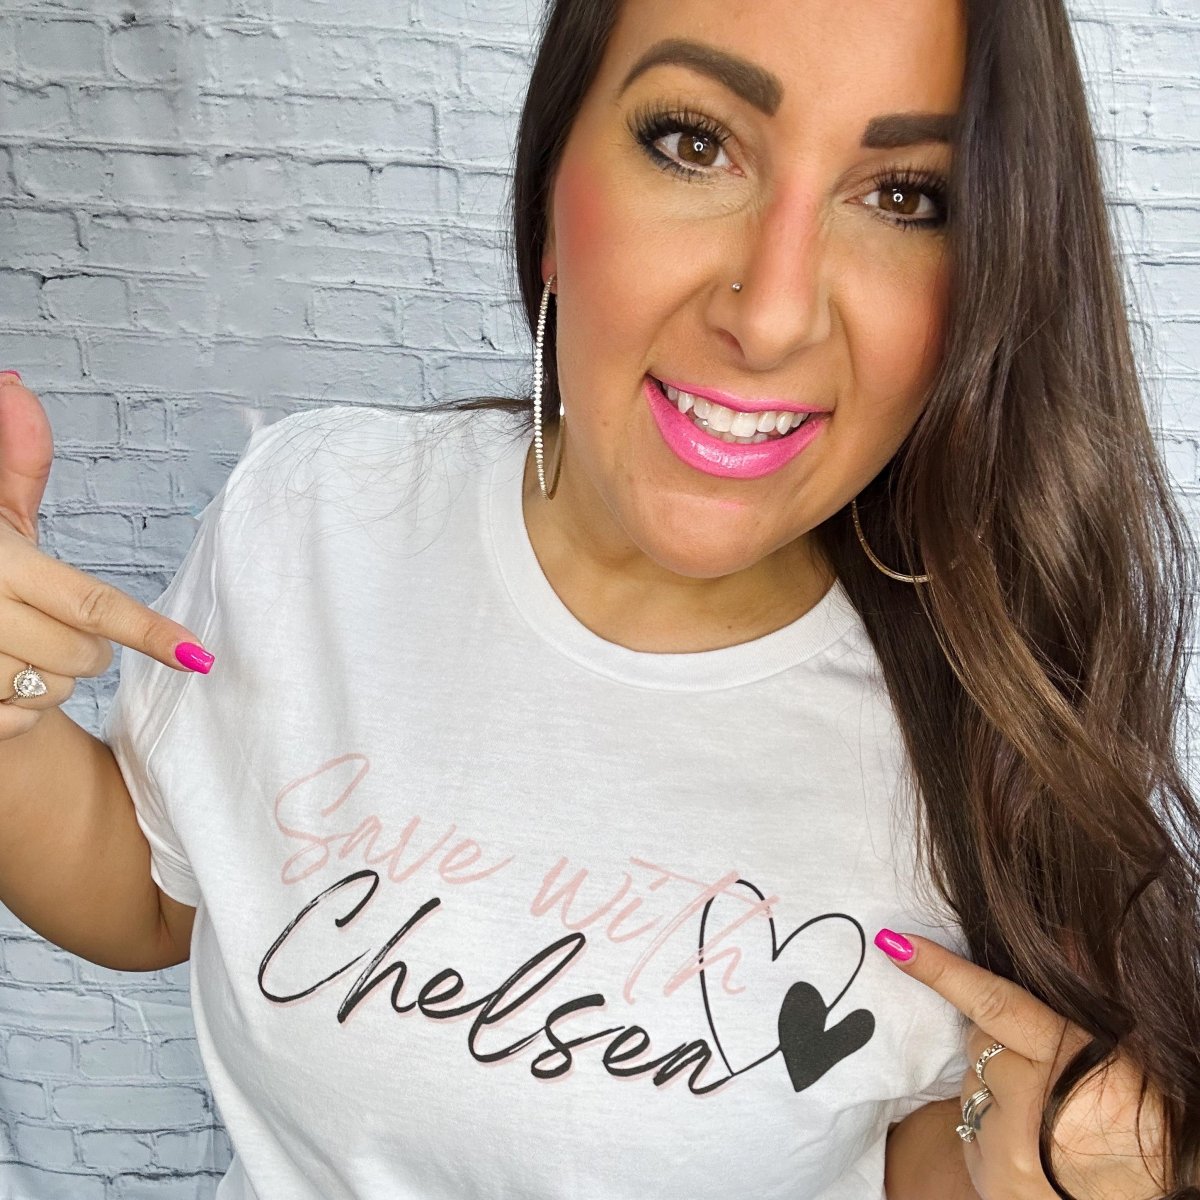 Save With Chelsea Script Tee - Limeberry Designs